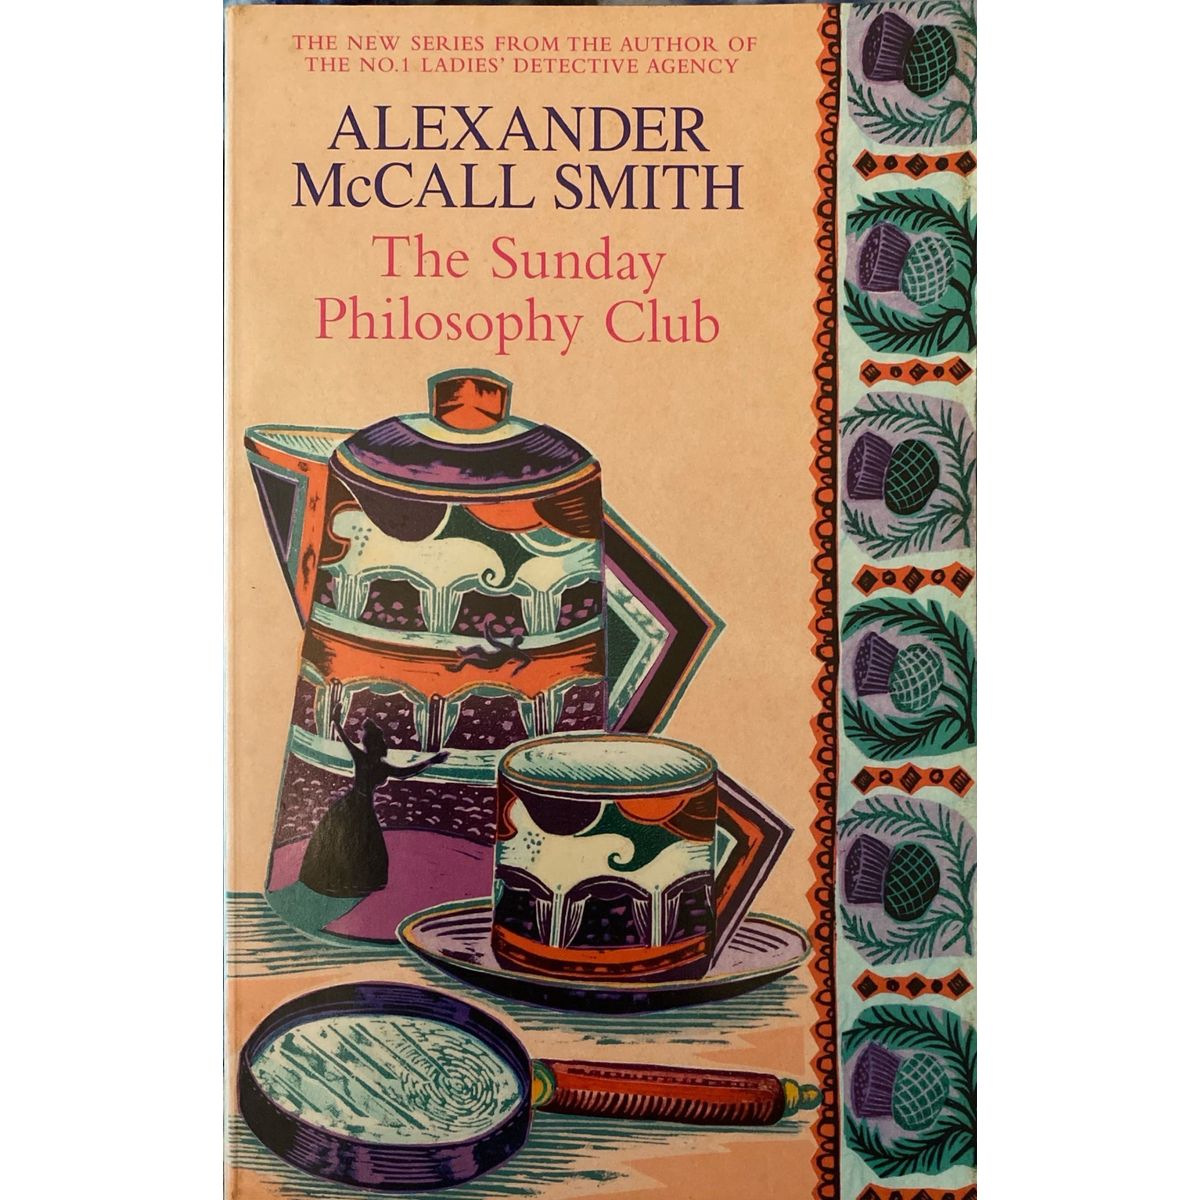 ISBN: 9780316729567 / 0316729566 - The Sunday Philosophy Club by Alexander McCall Smith [2004]